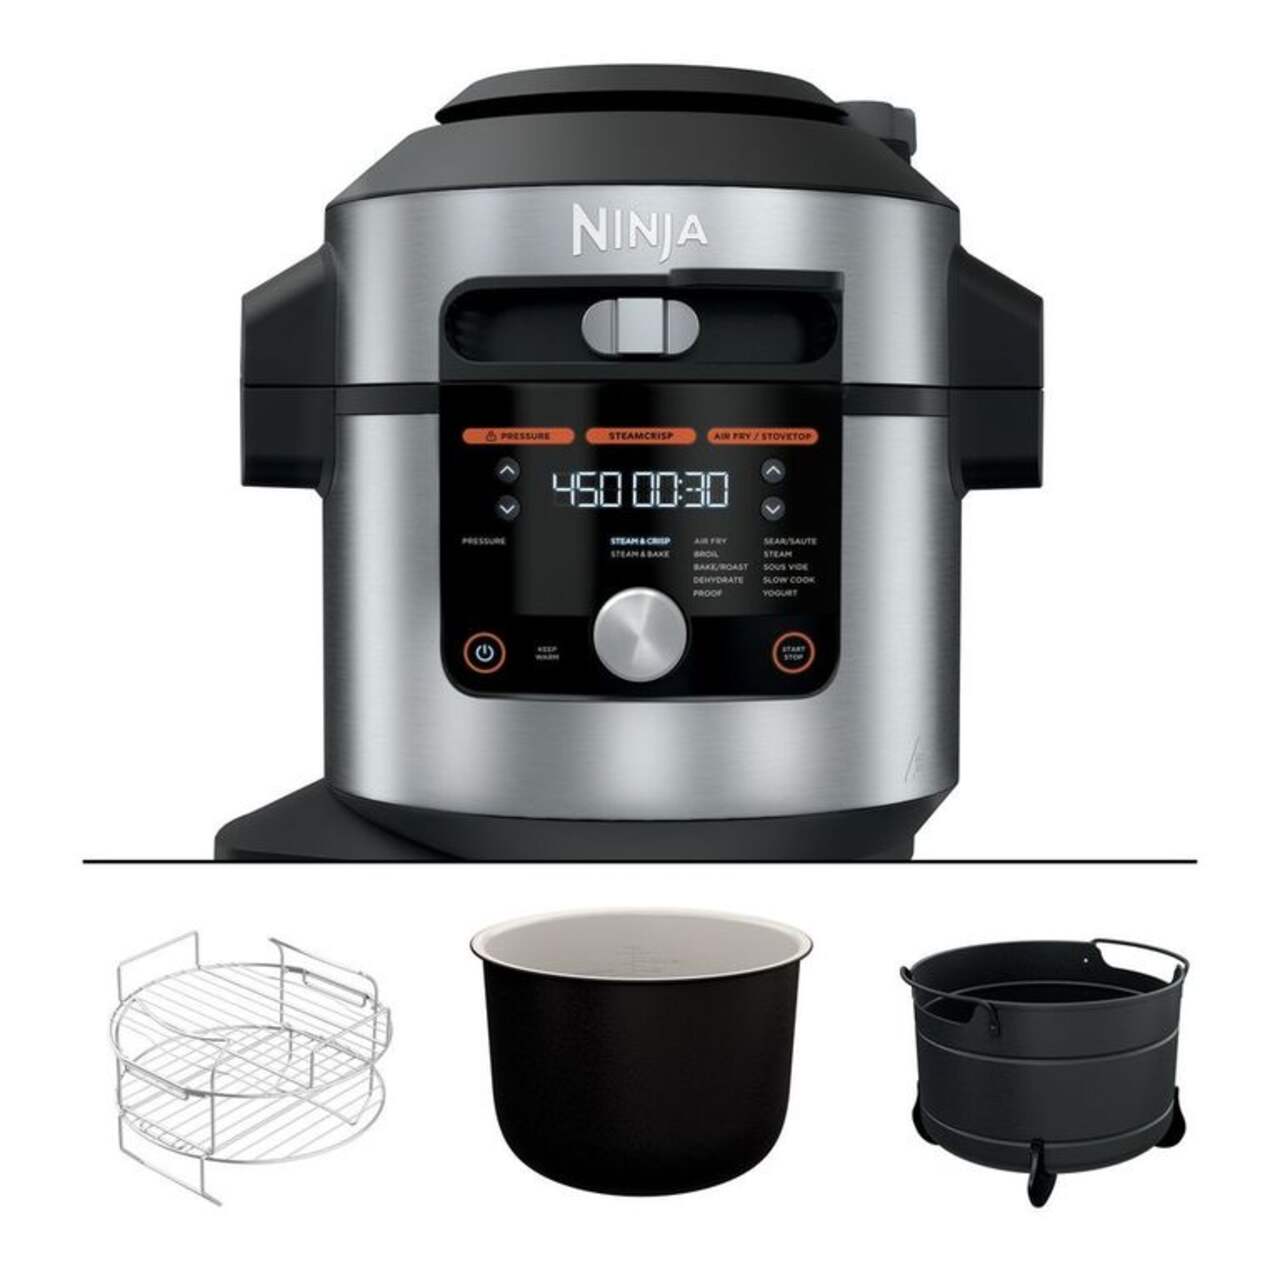 https://media-www.canadiantire.ca/product/living/kitchen/kitchen-appliances/0430959/ninja-foodi-onelid-pressure-cooker-air-fryer-be009ced-25d3-4e8f-a027-7d0c3c428297.png?imdensity=1&imwidth=640&impolicy=mZoom